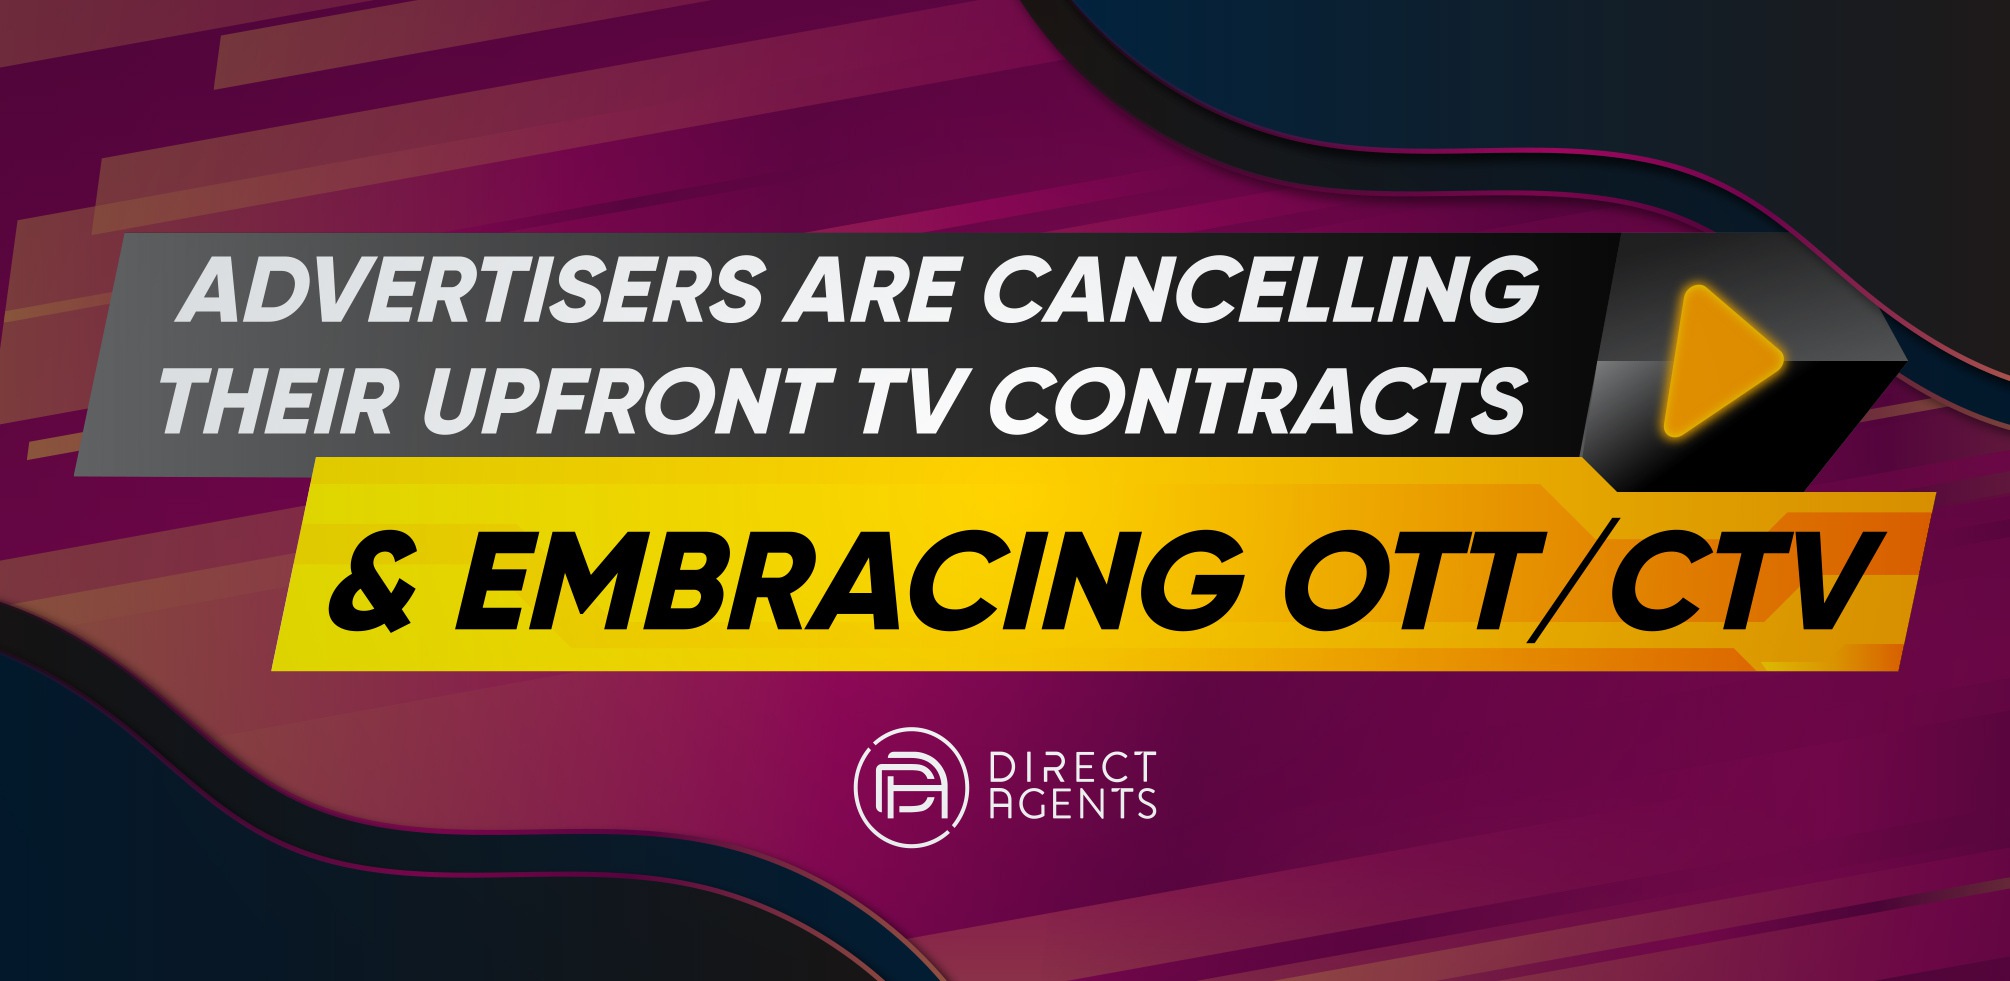 Advertisers are Cancelling their Upfront TV Contracts and Embracing OTT/CTV